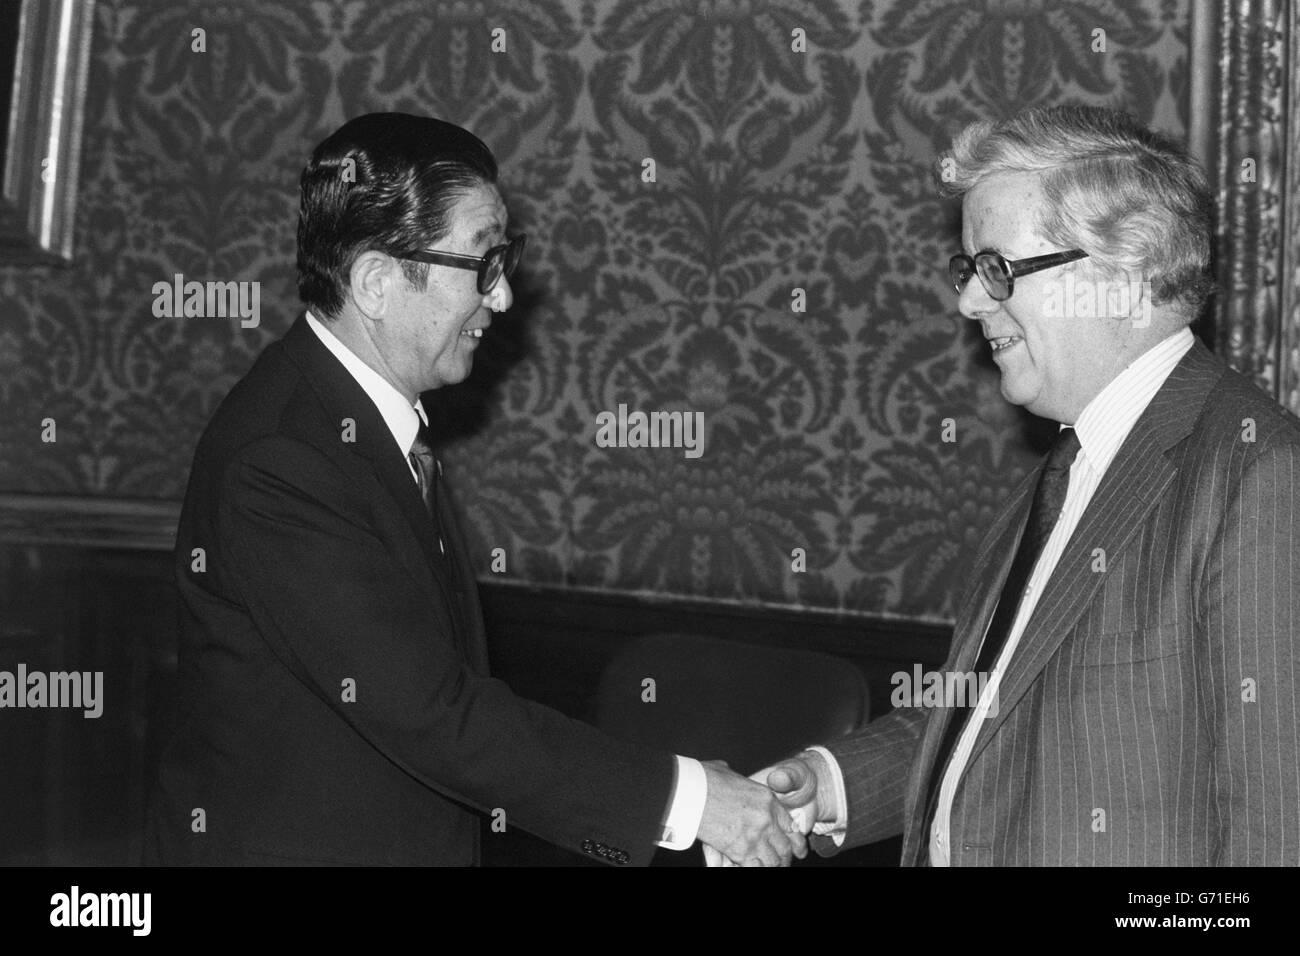 Japanese Minister for Foreign Affairs, Shintaro Abe, meets his British counterpart, Sir Geoffrey Howe, at the Foreign Office in London. Stock Photo